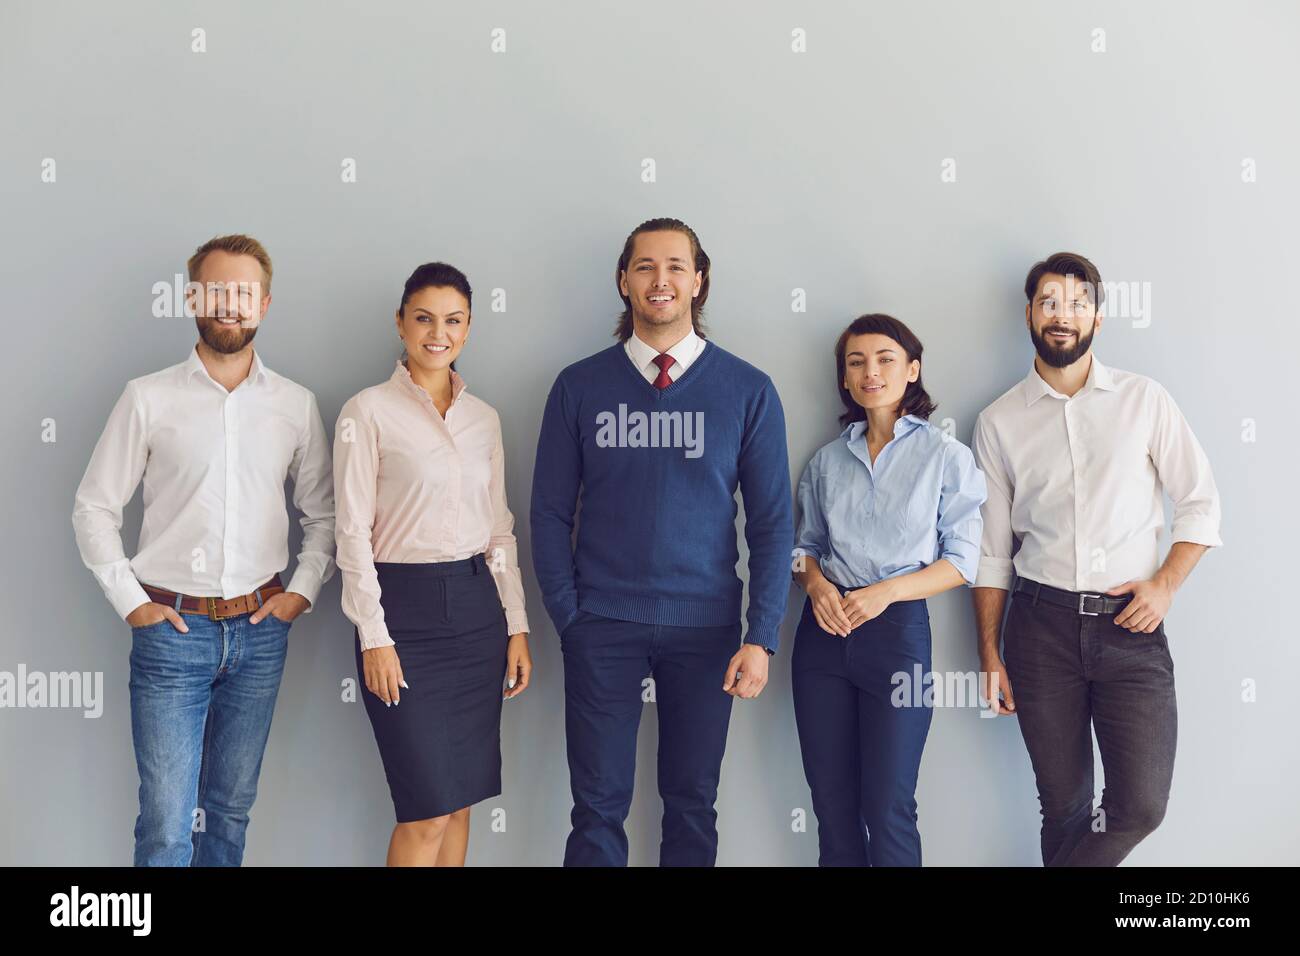 Group portrait of smiling young entrepreneurs or company workers looking at camera Stock Photo